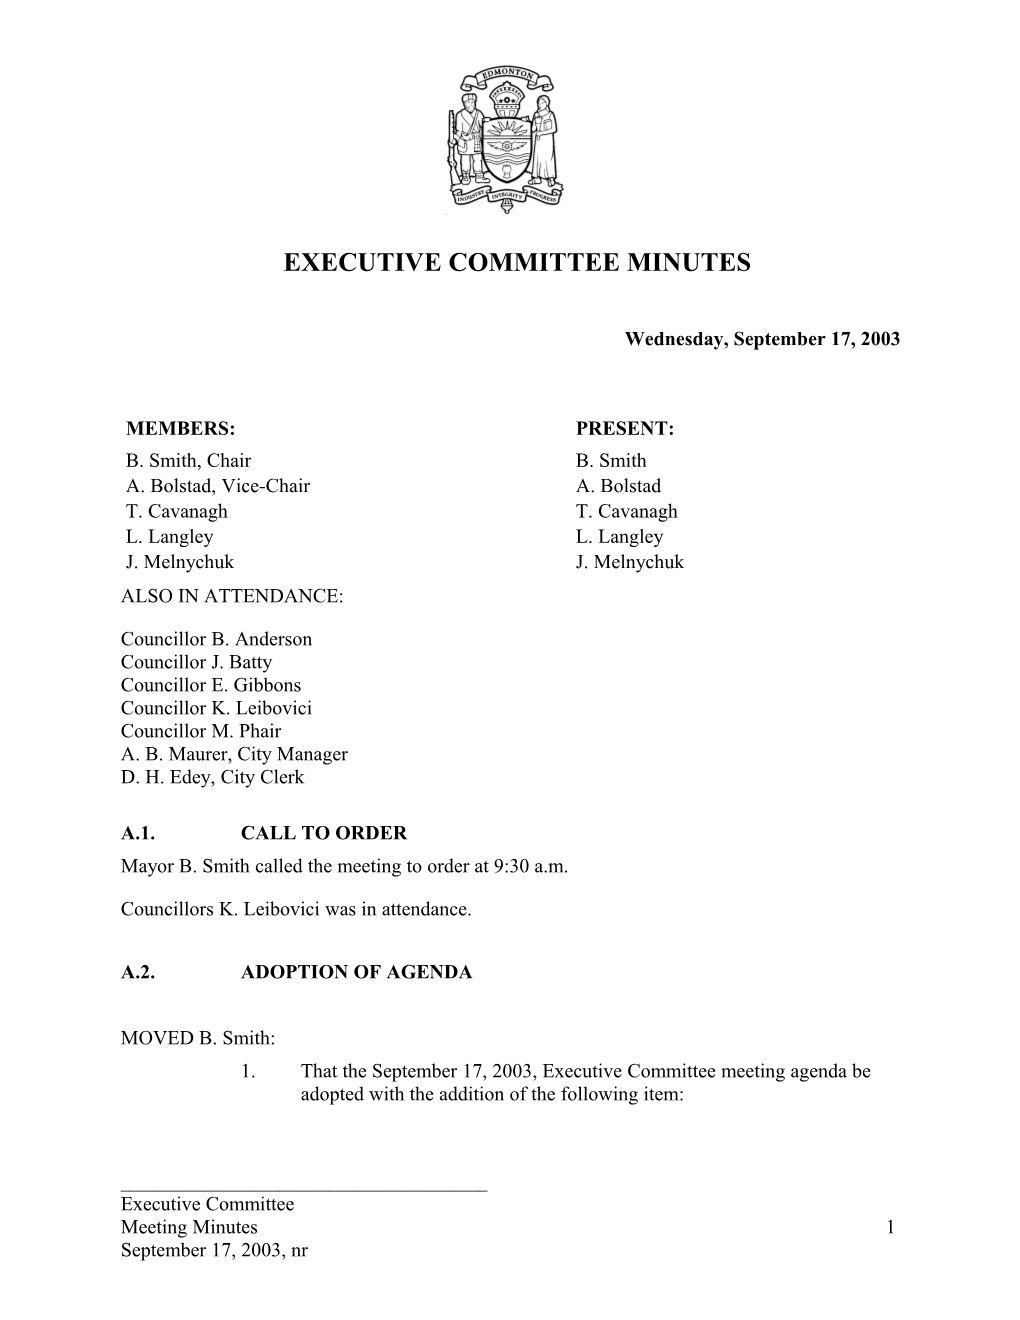 Minutes for Executive Committee September 17, 2003 Meeting